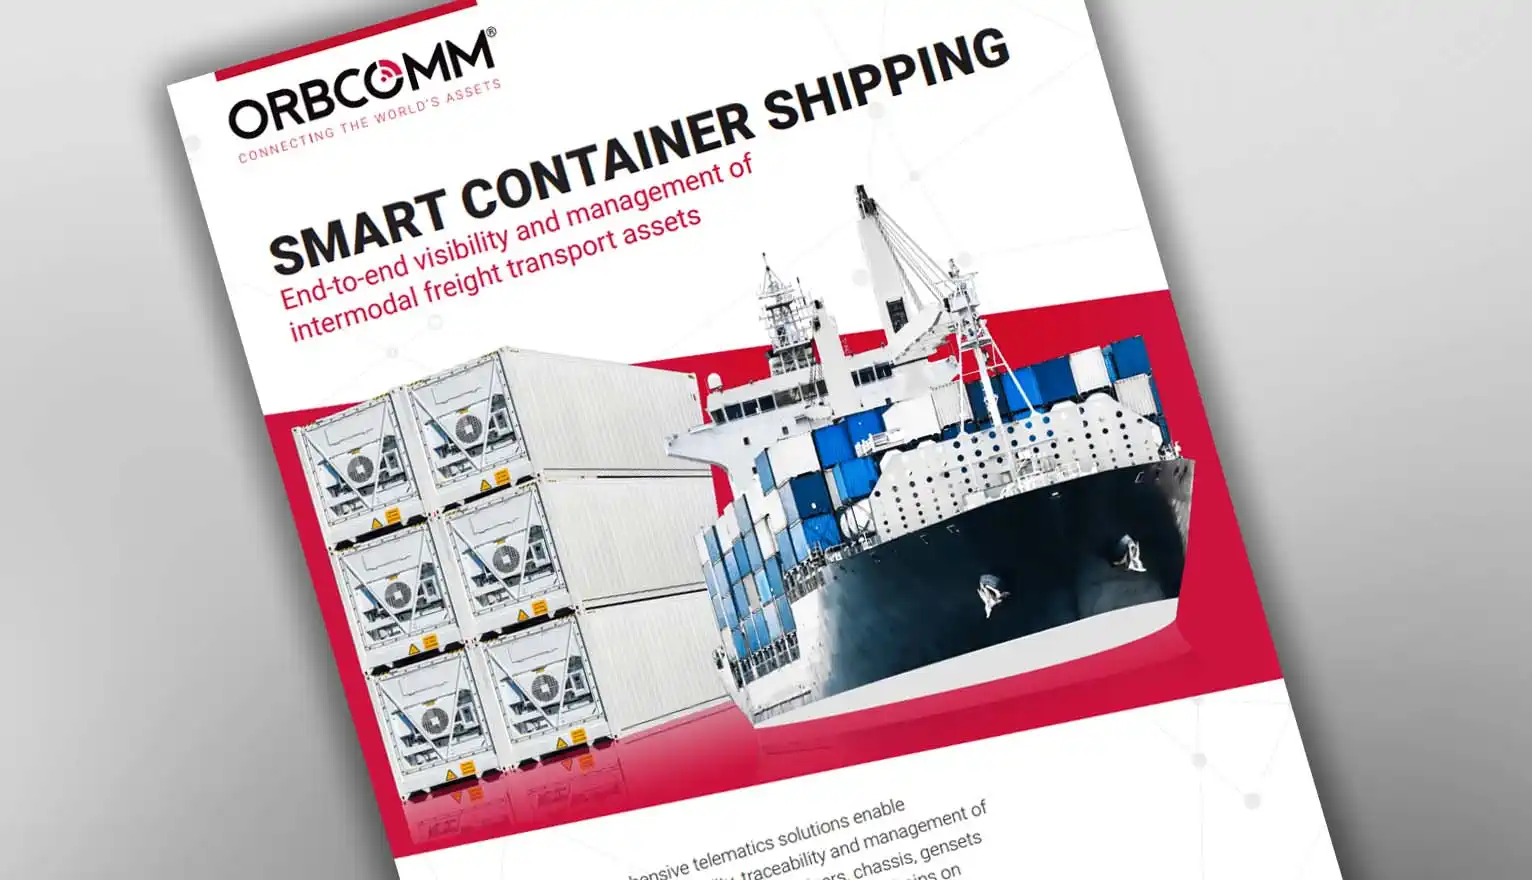 Smart container shipping